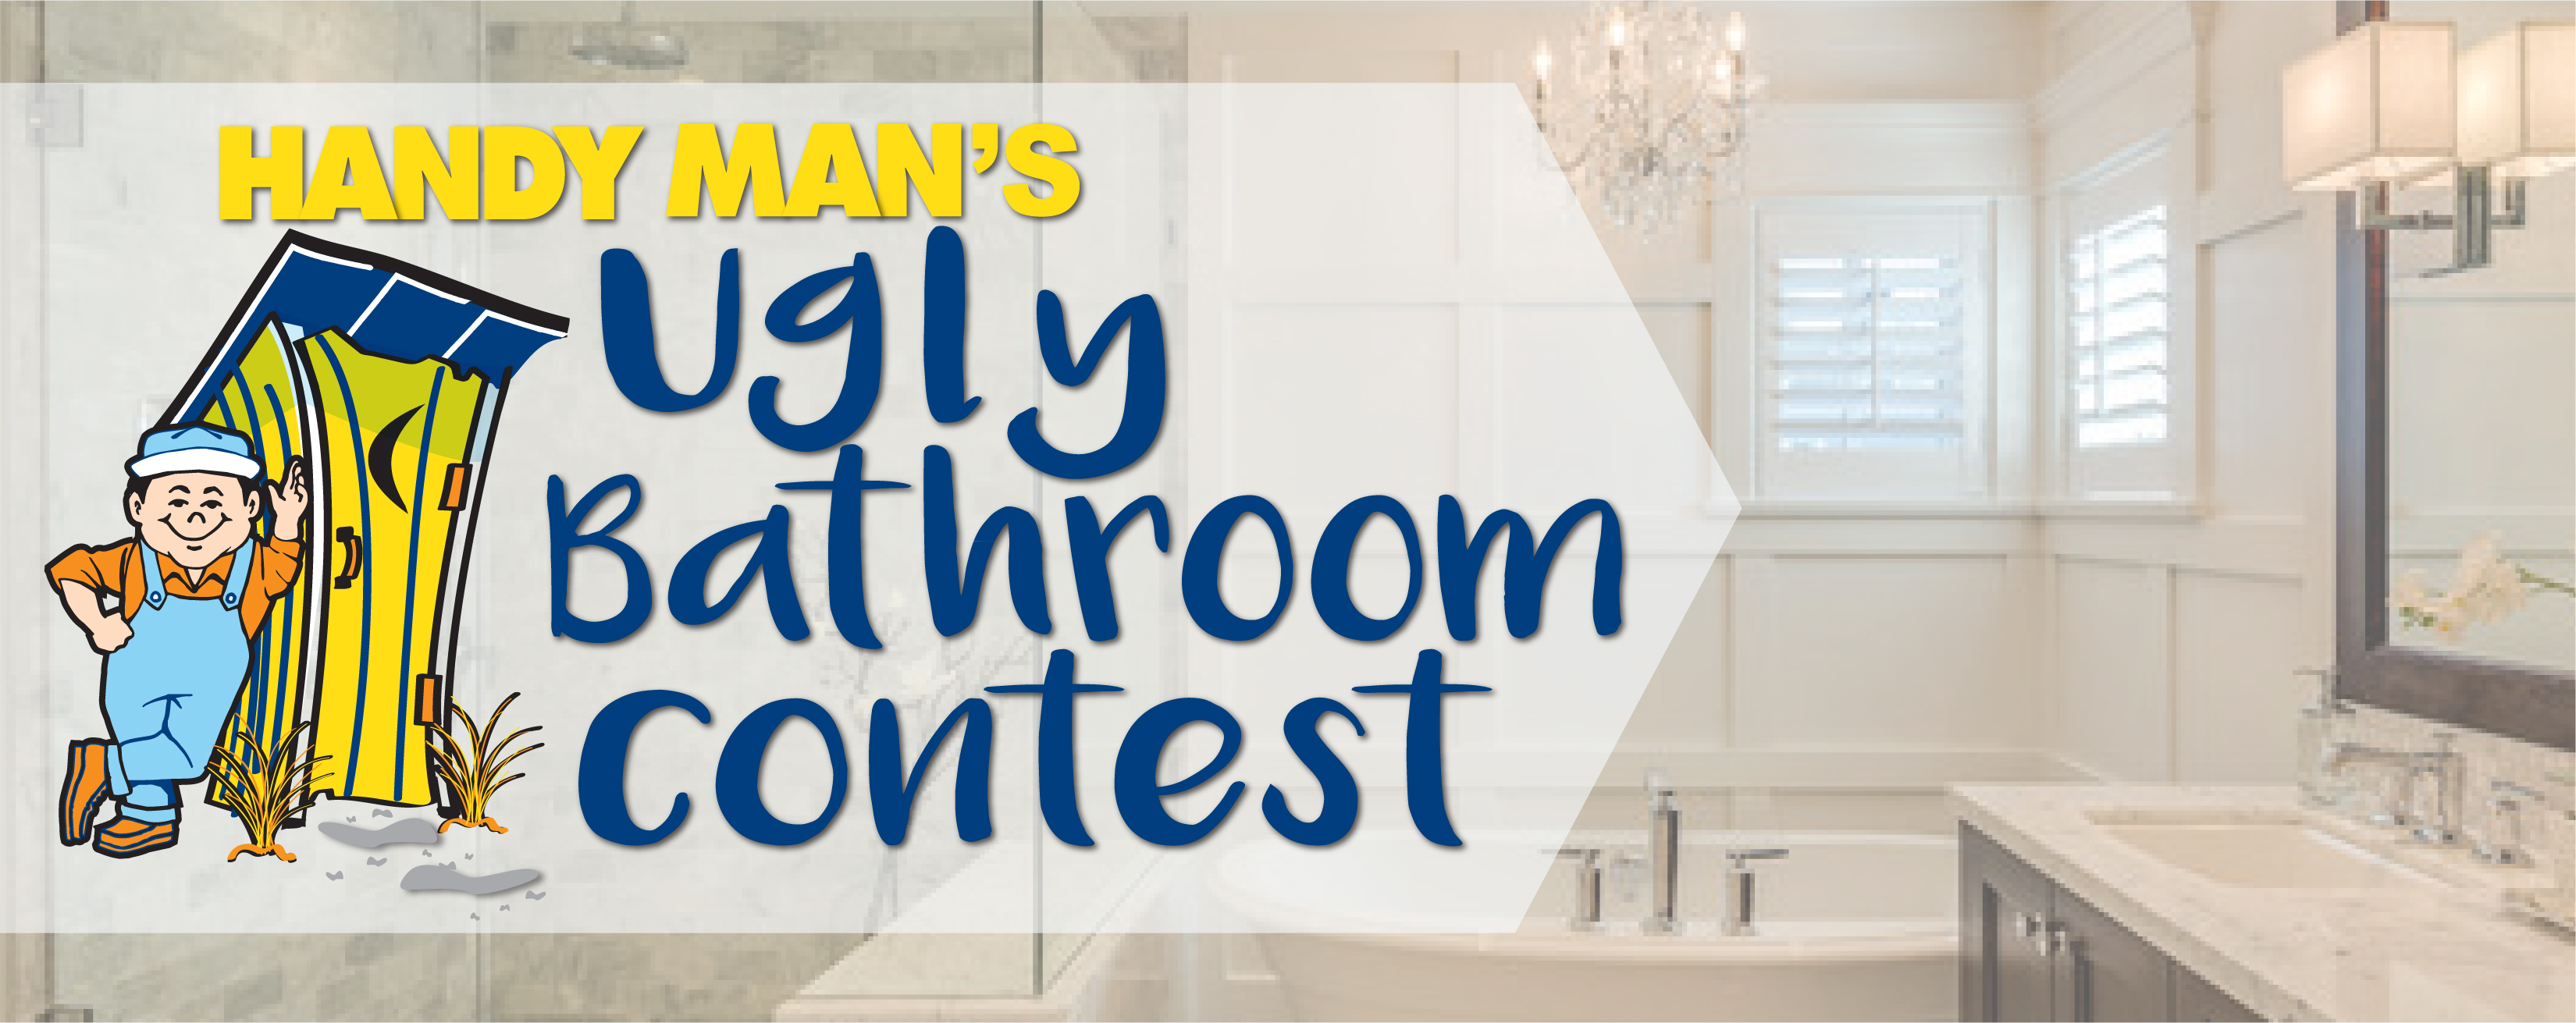 Congratulations To Our Ugly Bathroom Contest Winner Handy Man Home Remodeling Center